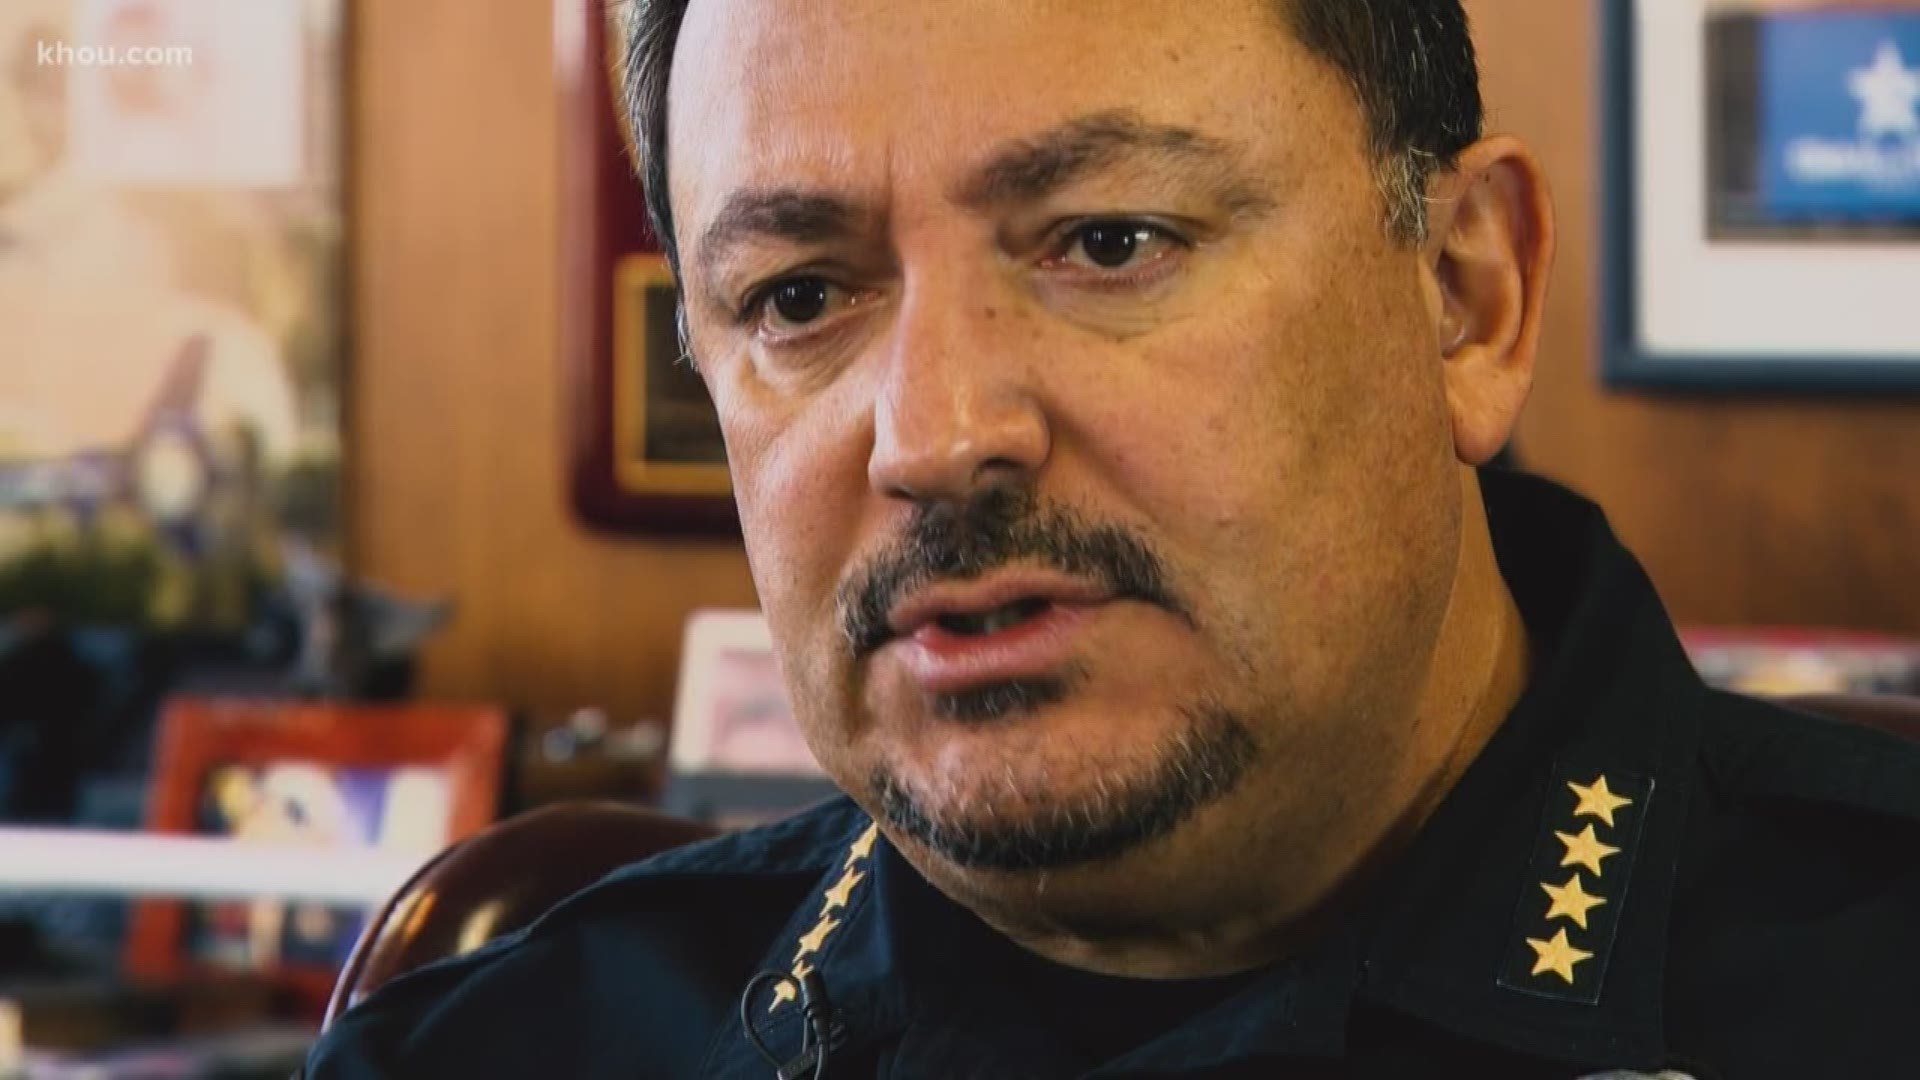 HPD Chief Art Acevedo called lenient punishment for certain DWI offenders “outrageous” while DA Kim Ogg’s office said it’s the “right thing to do” in most cases.